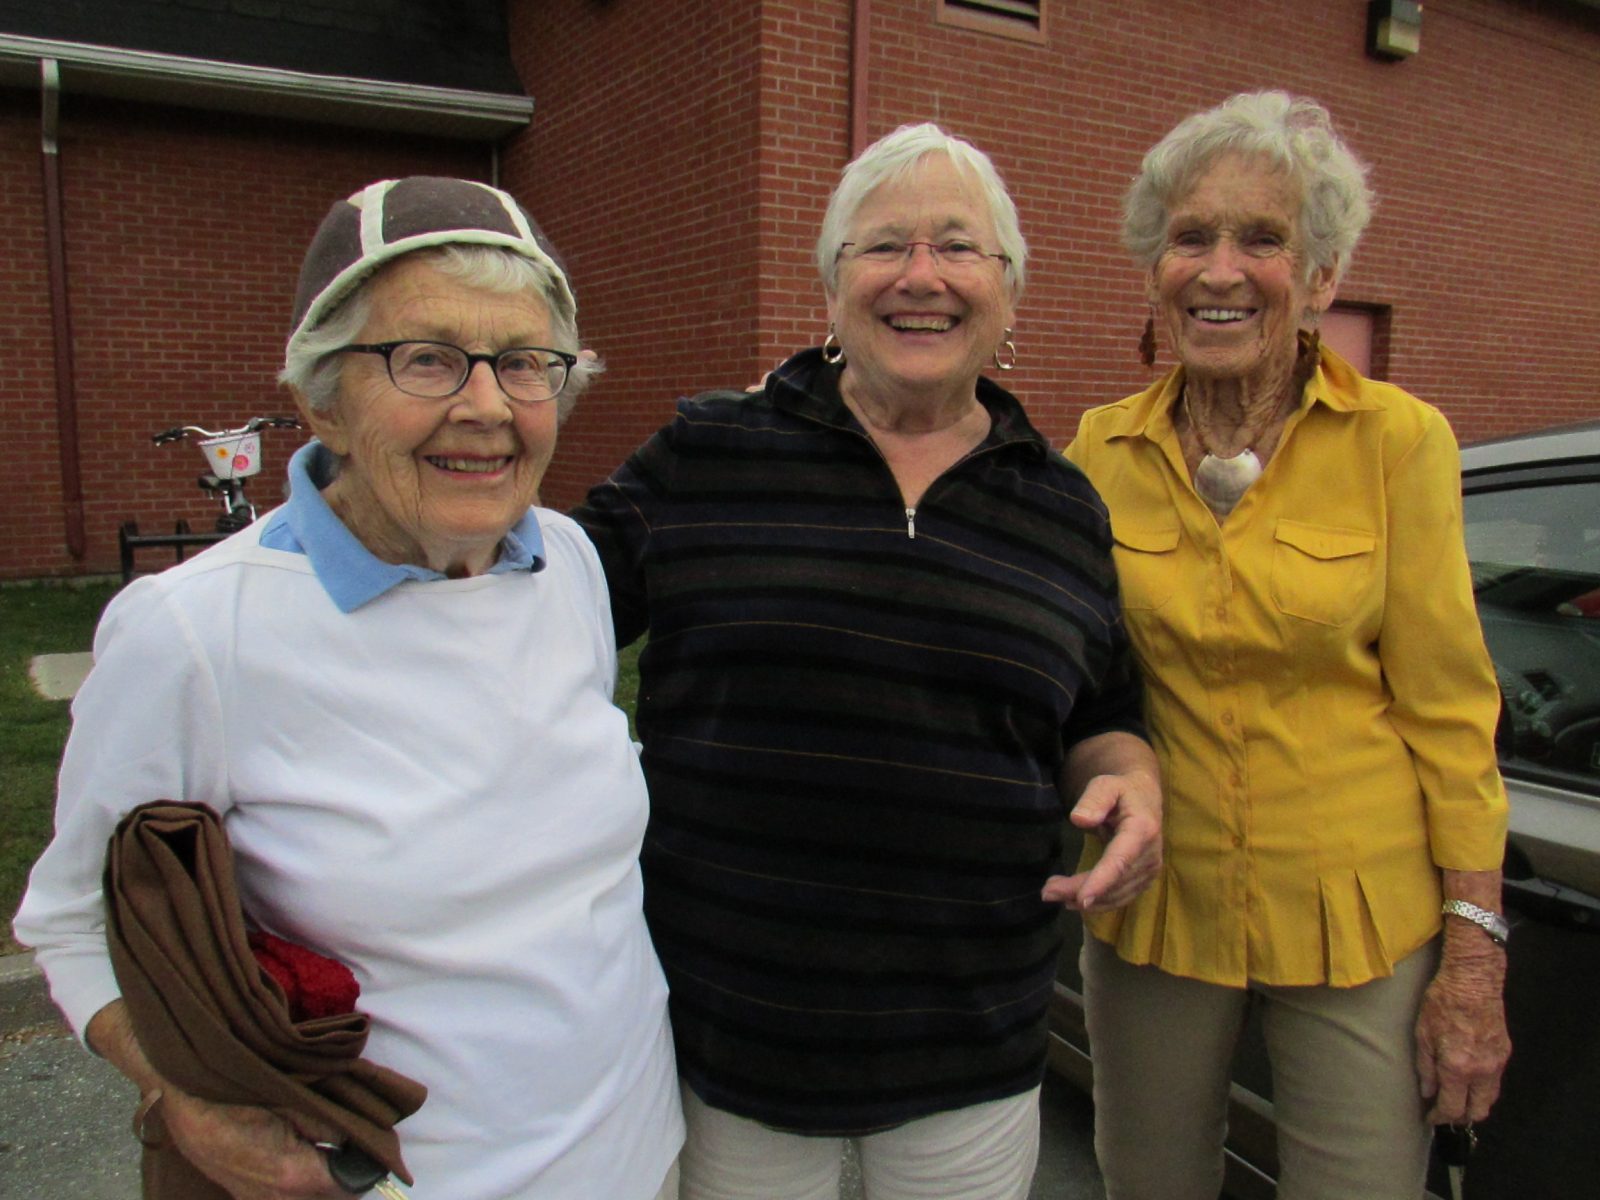 Grannies gearing up for annual clothing sale